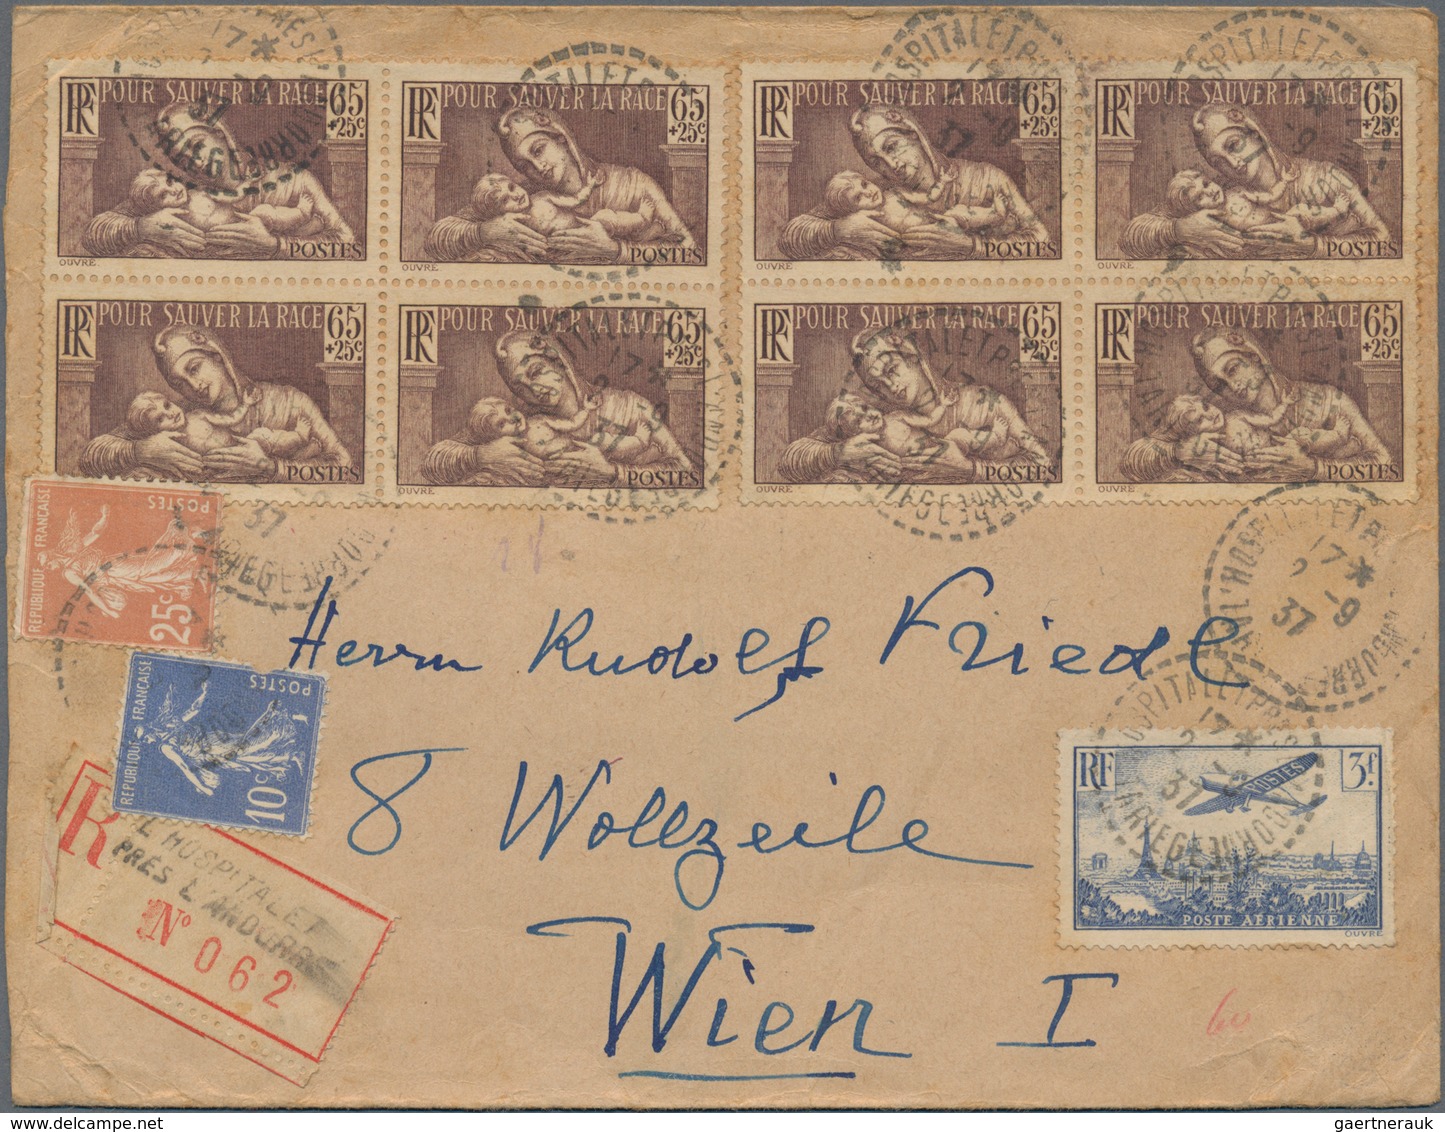 Europa: 1860/1960 (ca.), Finland/France+few Danzig, holding of several hundred covers/cards, incl. r